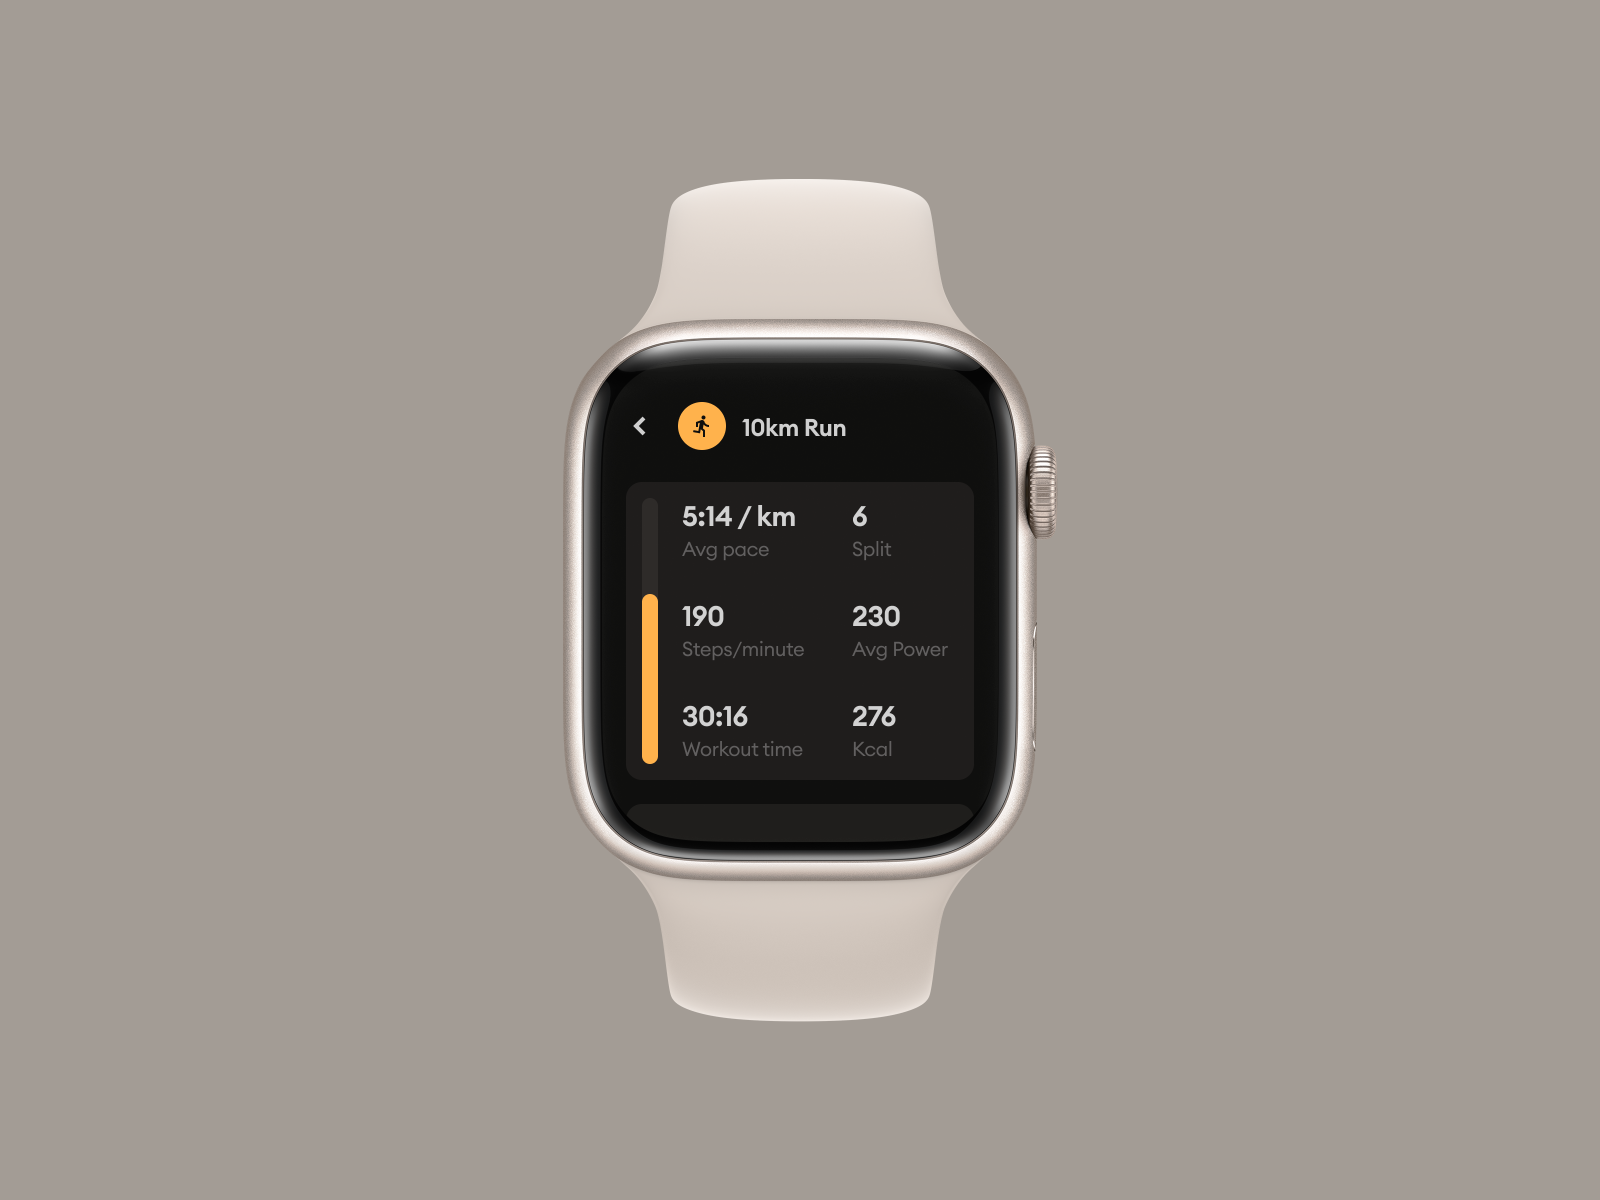 80+ Best Free Apple Watch Mockup Templates (Updated For Series 8 & Ultra) -  365 Web Resources